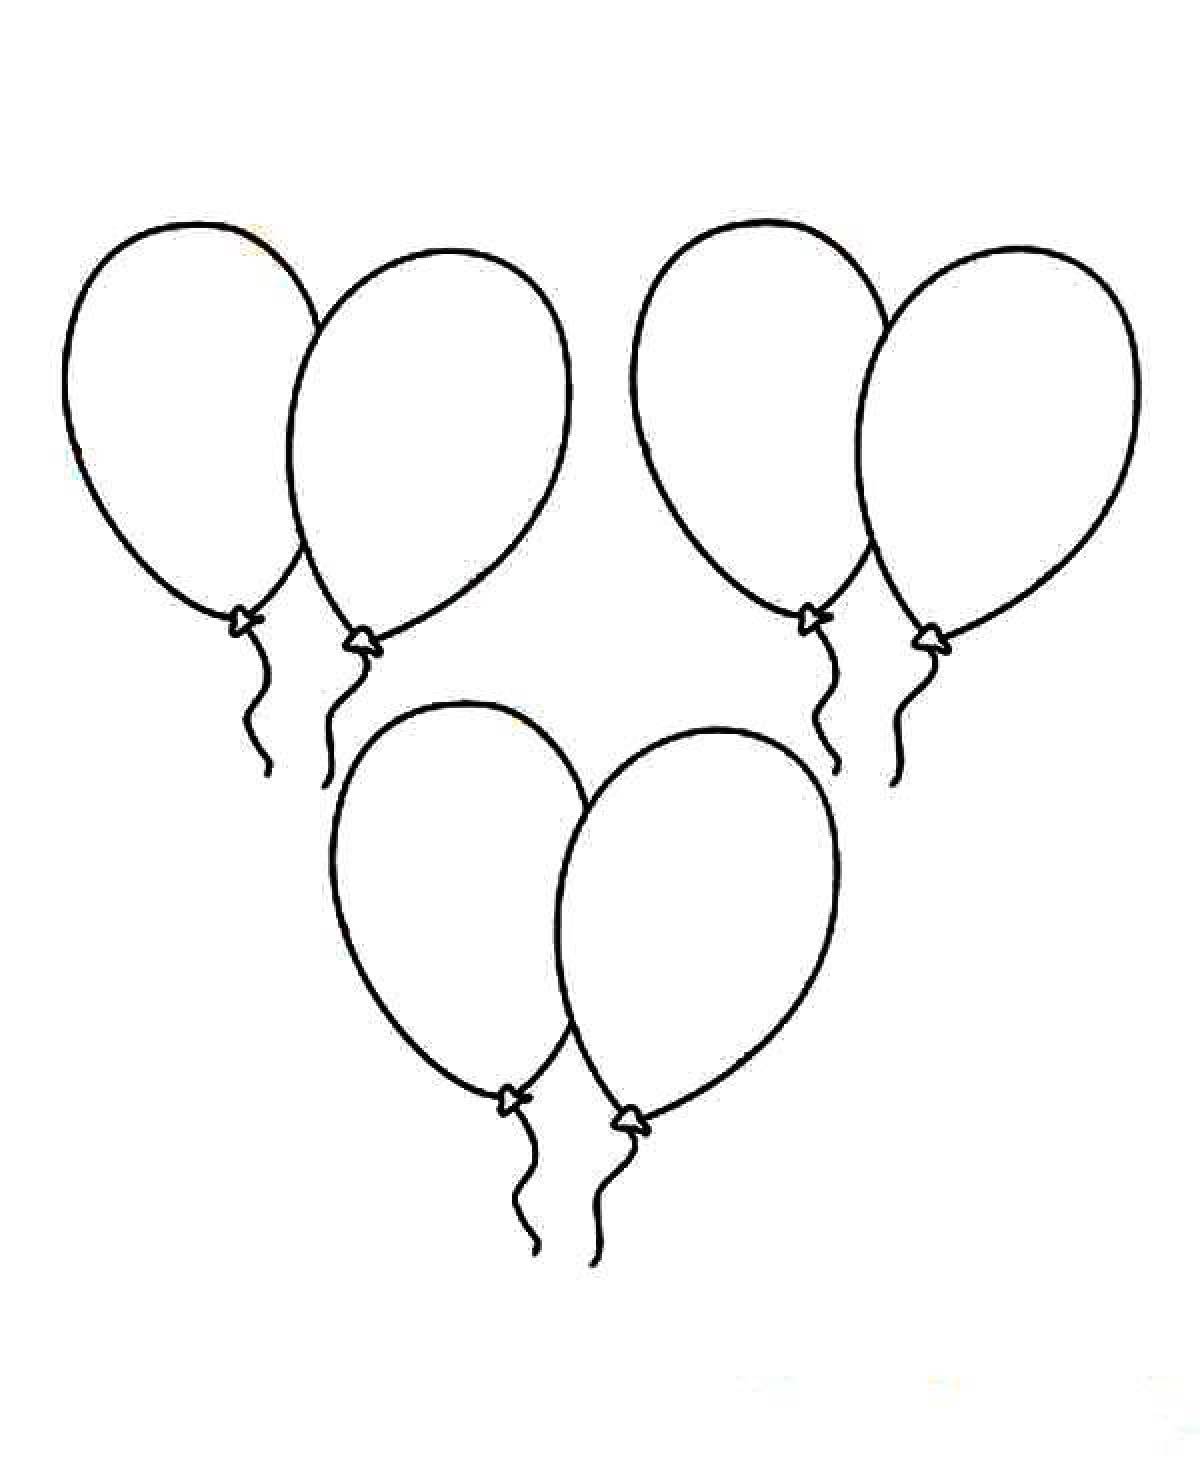 Funny balloons coloring for kids